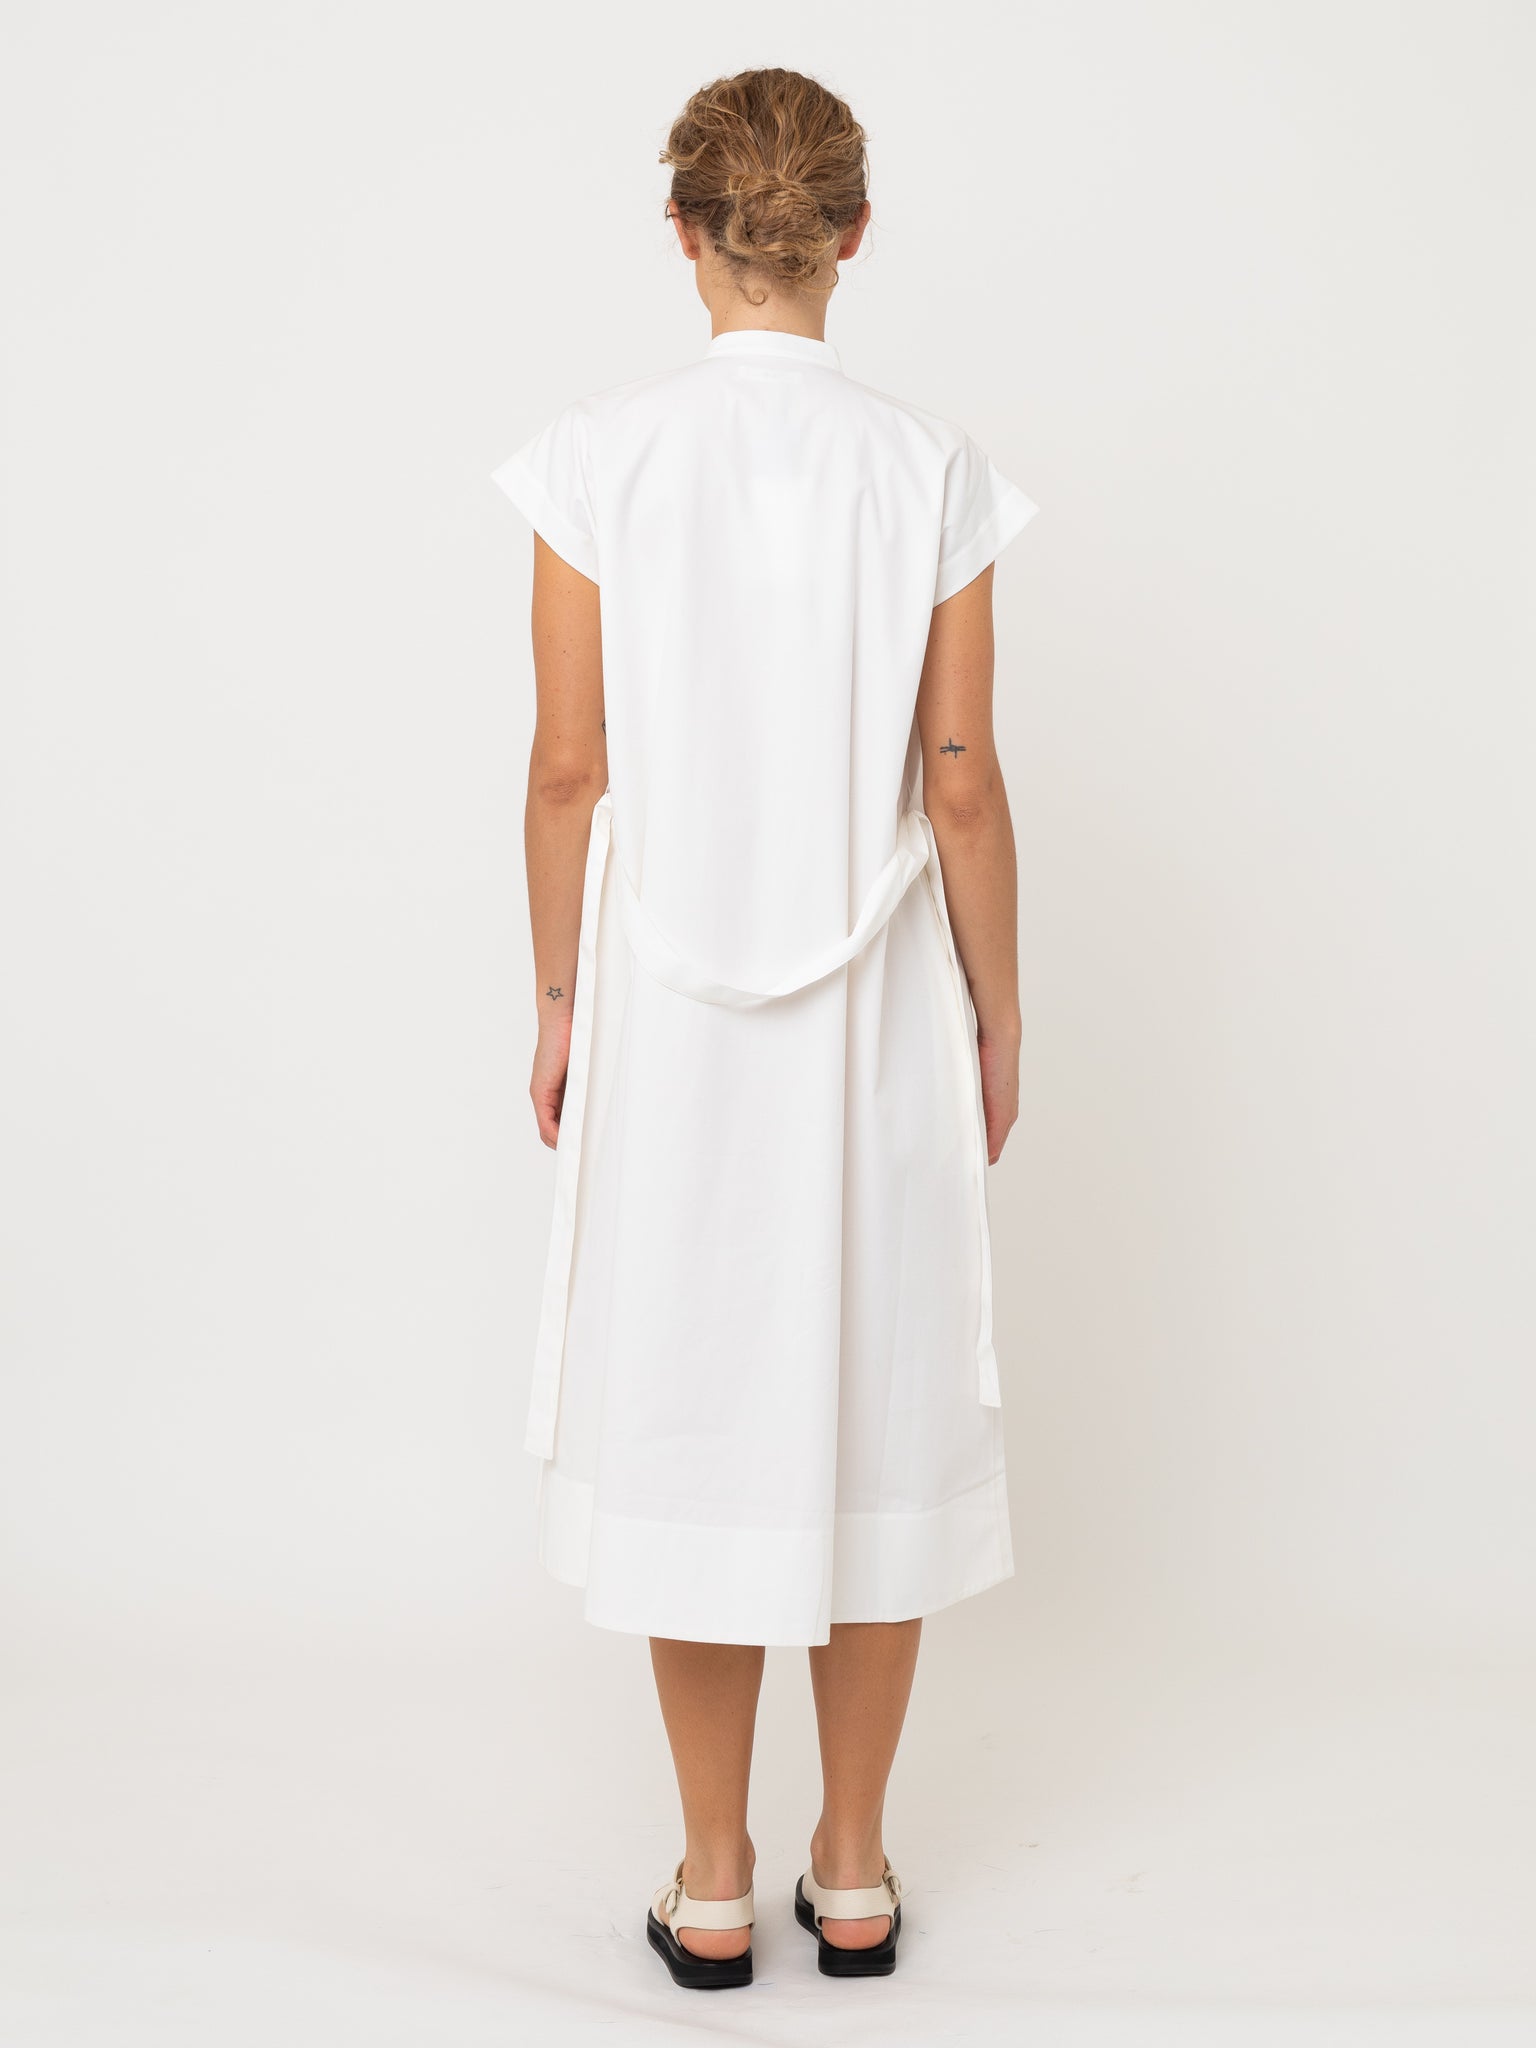 Embroidered Dress White Cotton